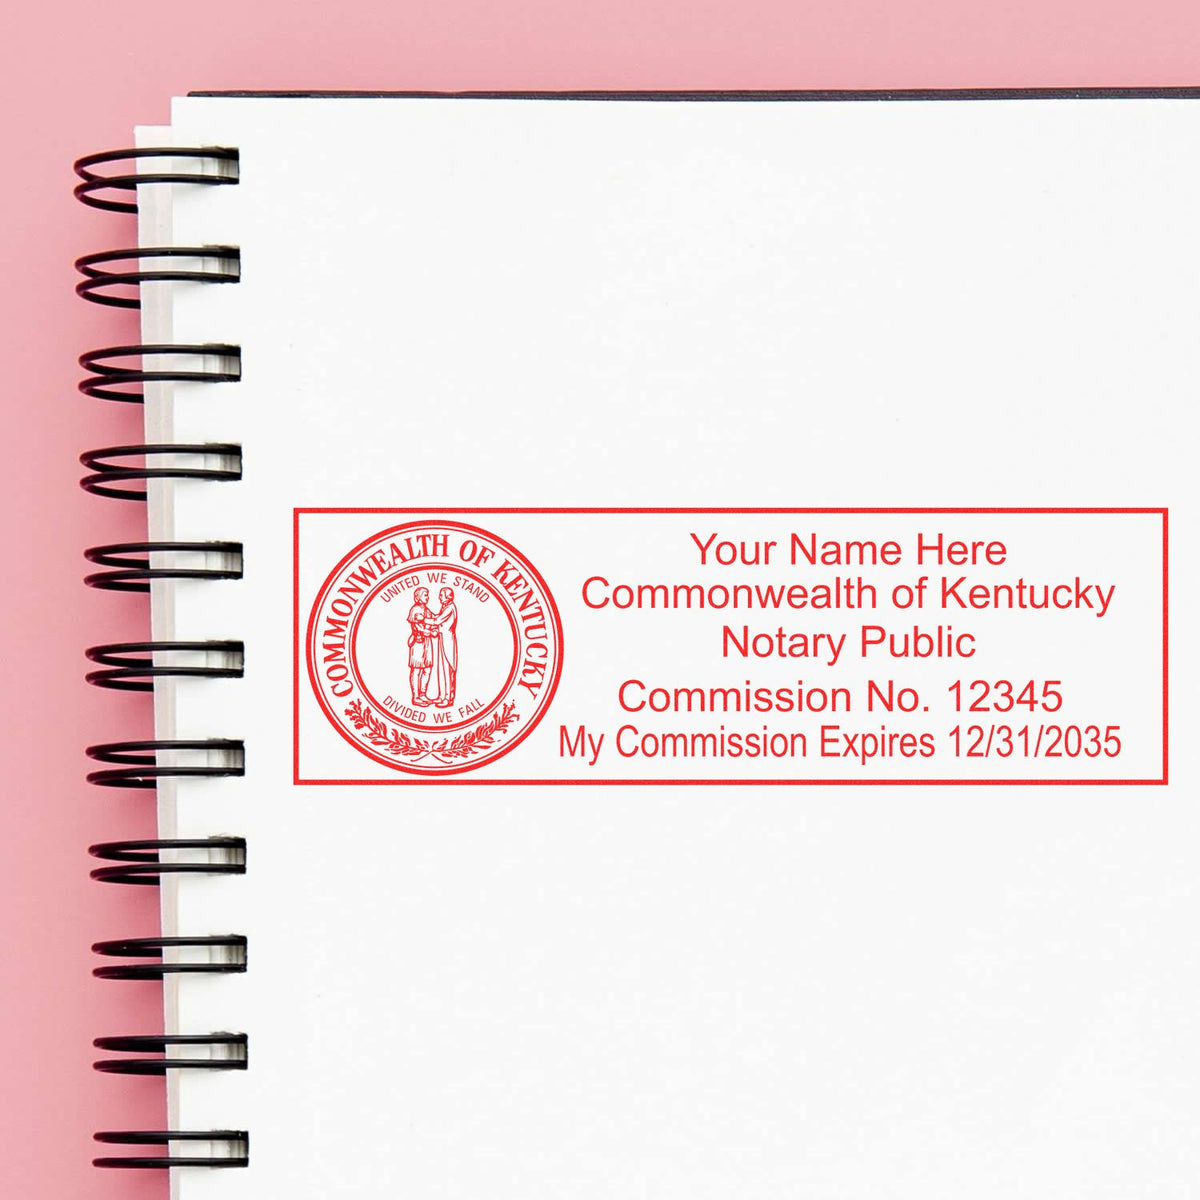 An alternative view of the MaxLight Premium Pre-Inked Kentucky State Seal Notarial Stamp stamped on a sheet of paper showing the image in use